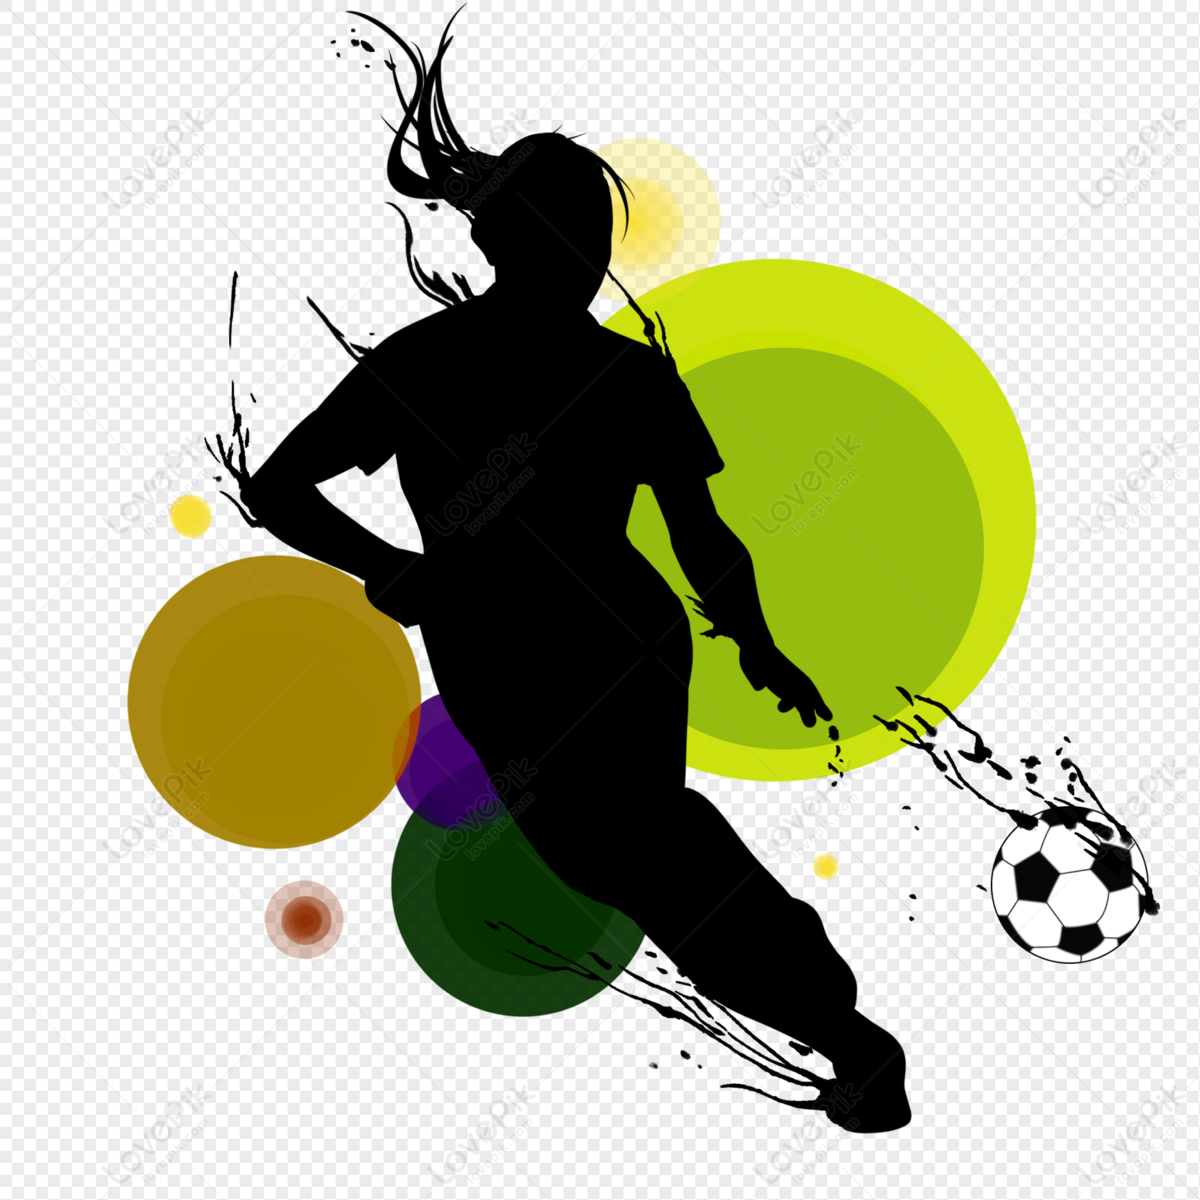 Soccer Logo Championship, Soccer Championship, Soccer Logo, Soccer Logo  Clipart PNG Transparent Clipart Image and PSD File for Free Download